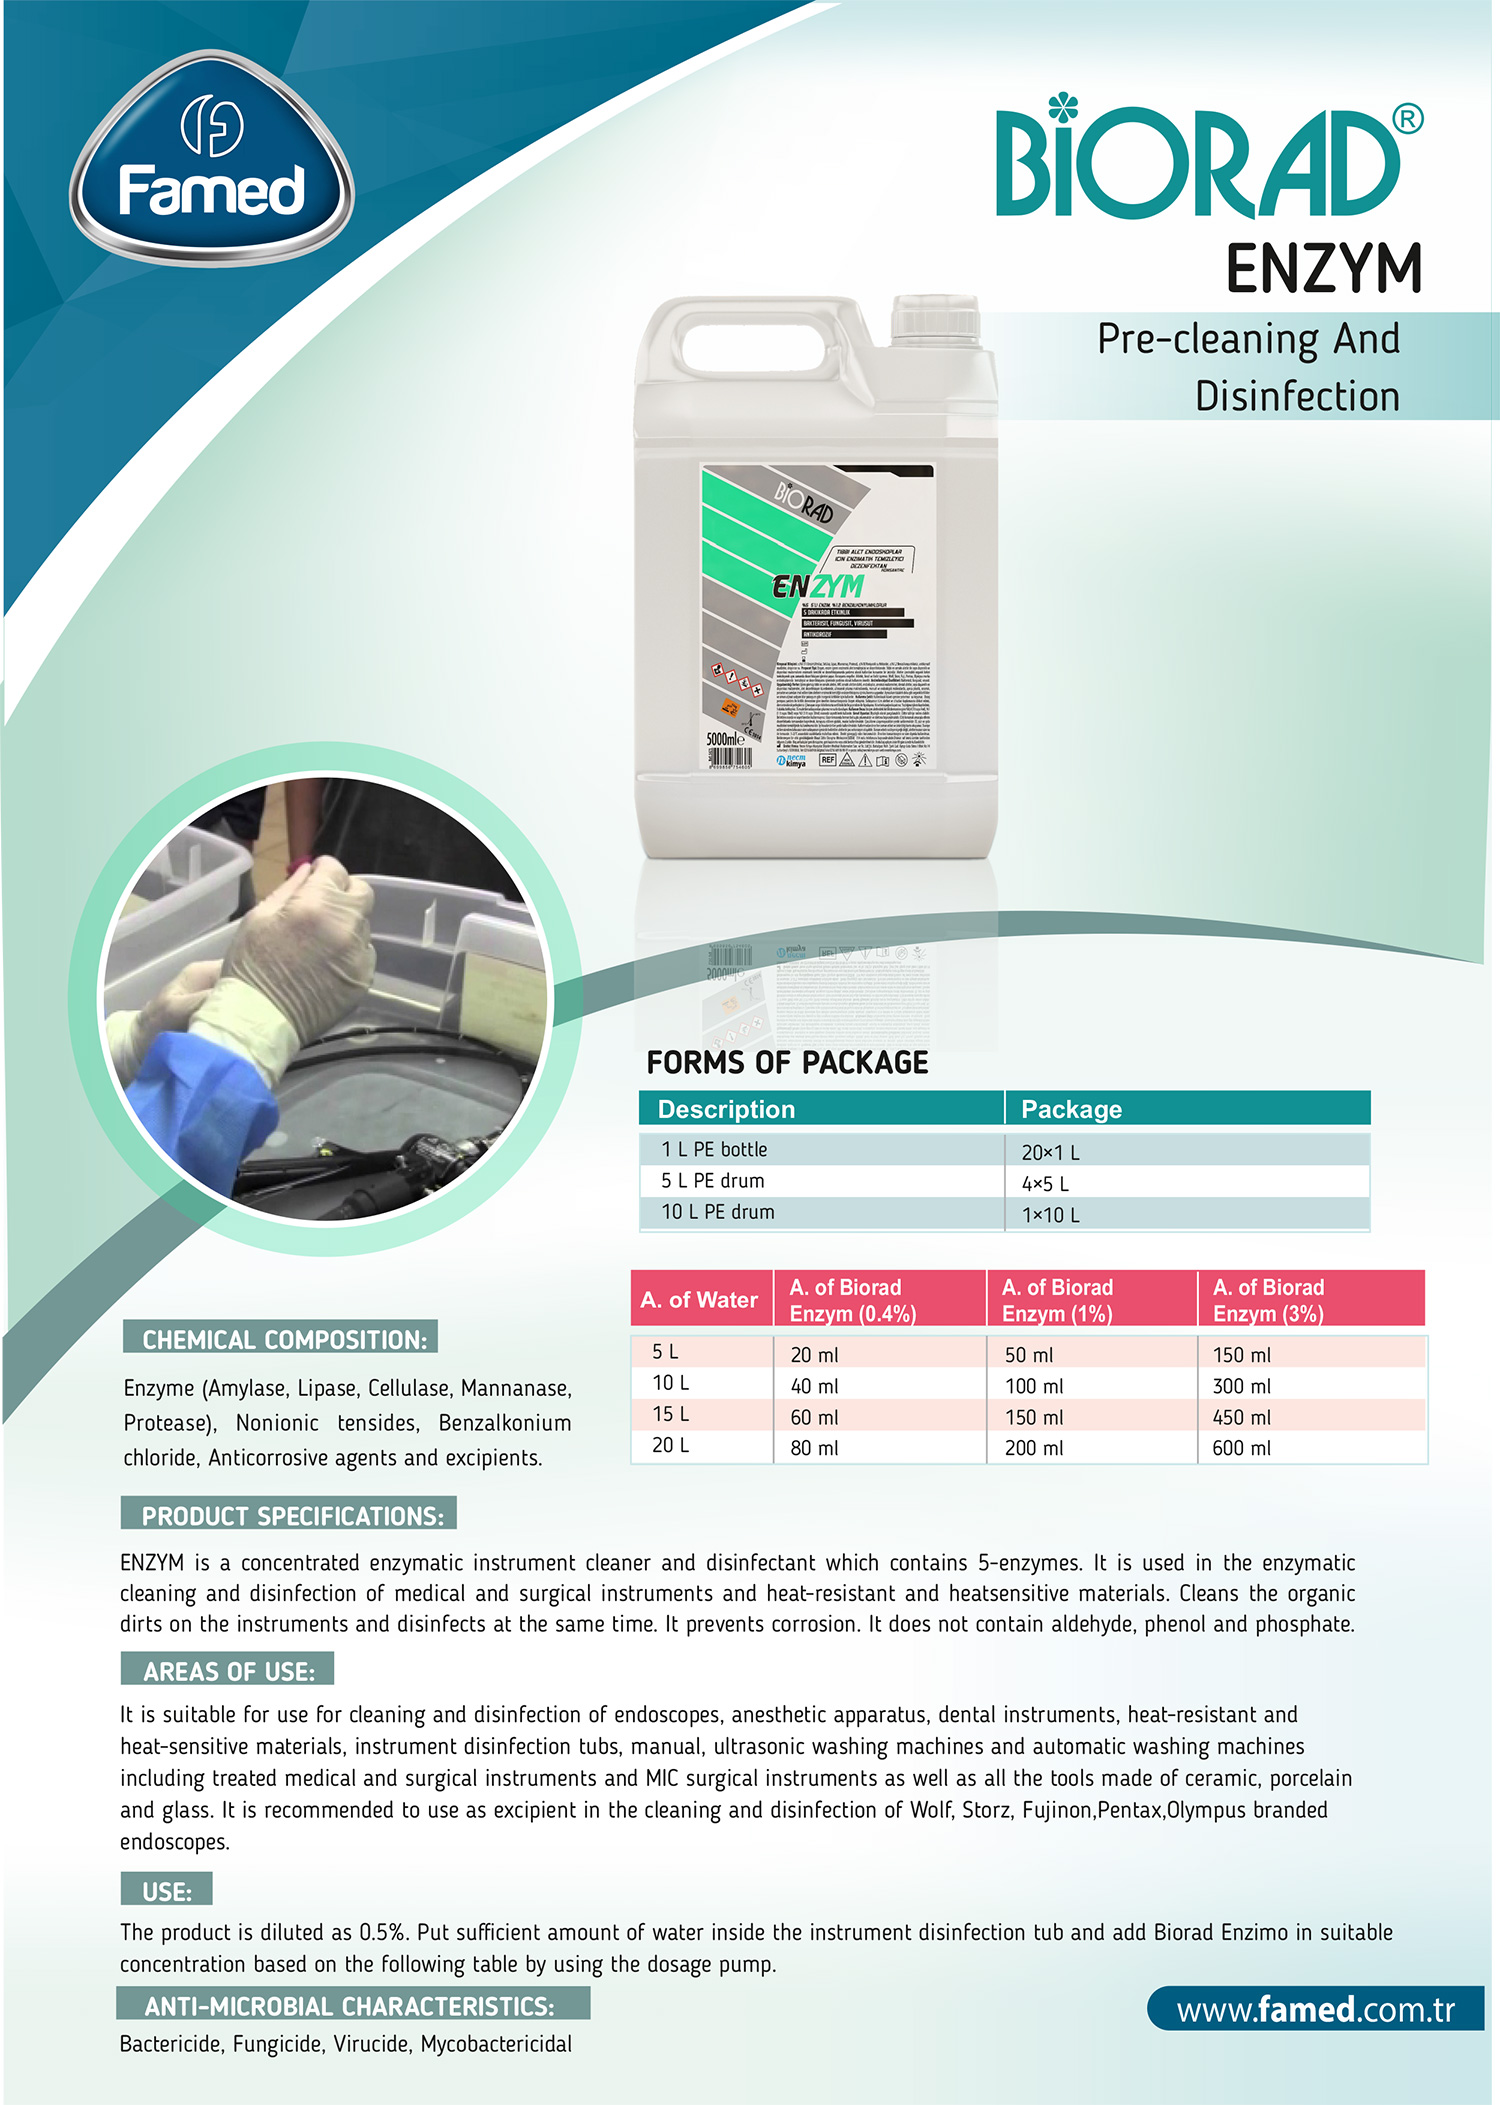 Enzym Pre-cleaning And Disinfection